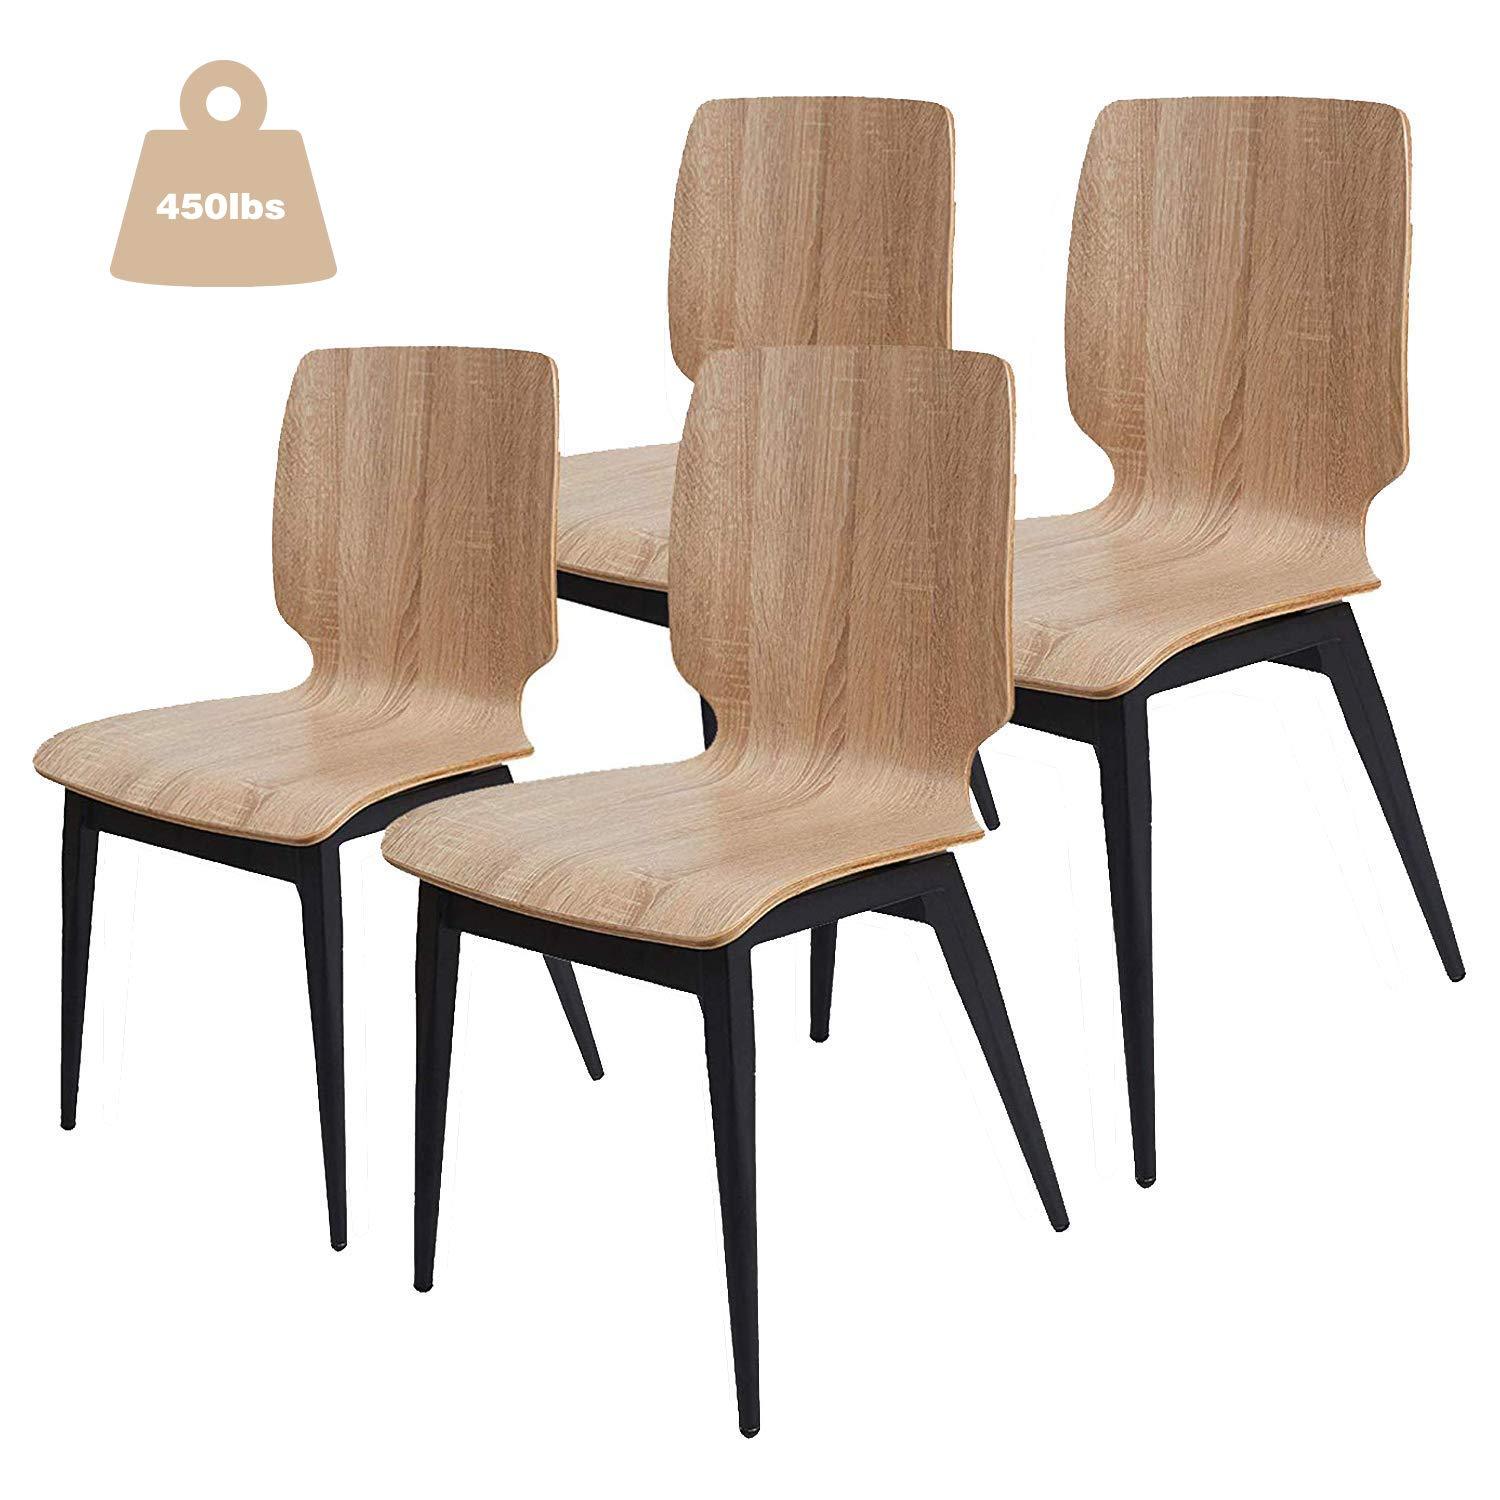 Bosonshop 4 Pack Kitchen Dining Chairs with Bentwood Seat and Metal Legs,Ergonomic Design, Natural